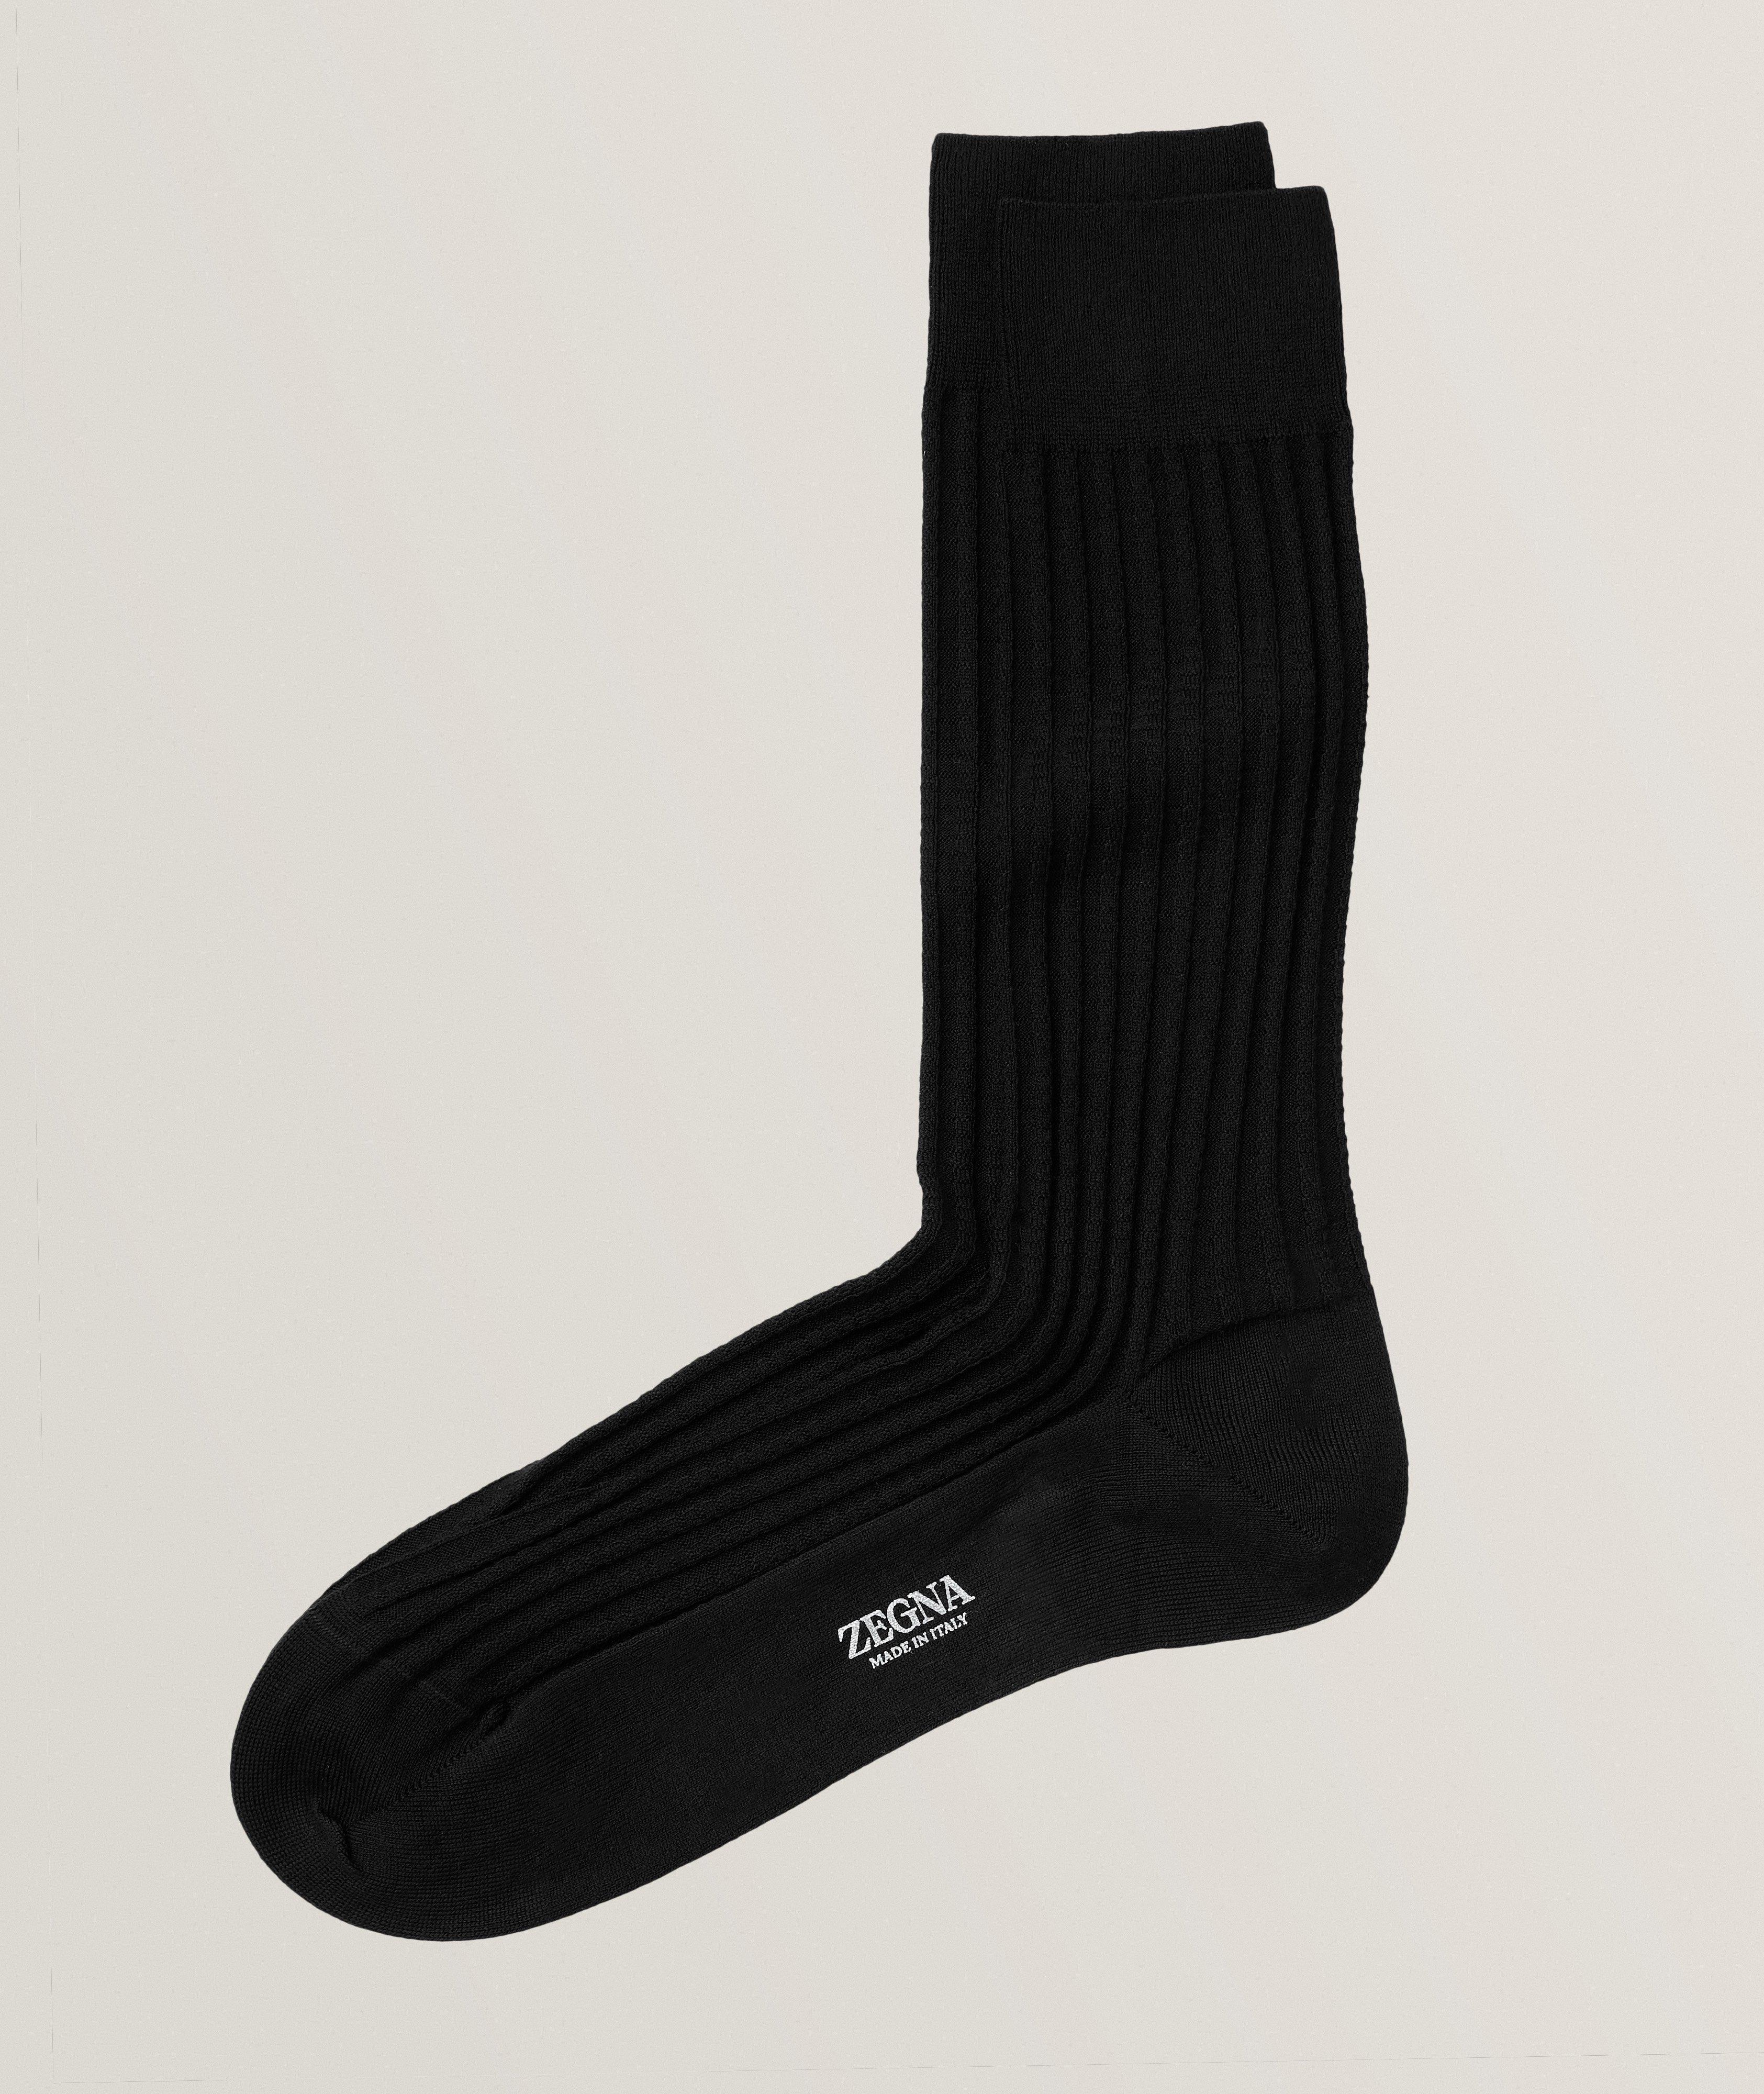 Texture Above All Stretch-Organic Cotton Blend Socks  image 0